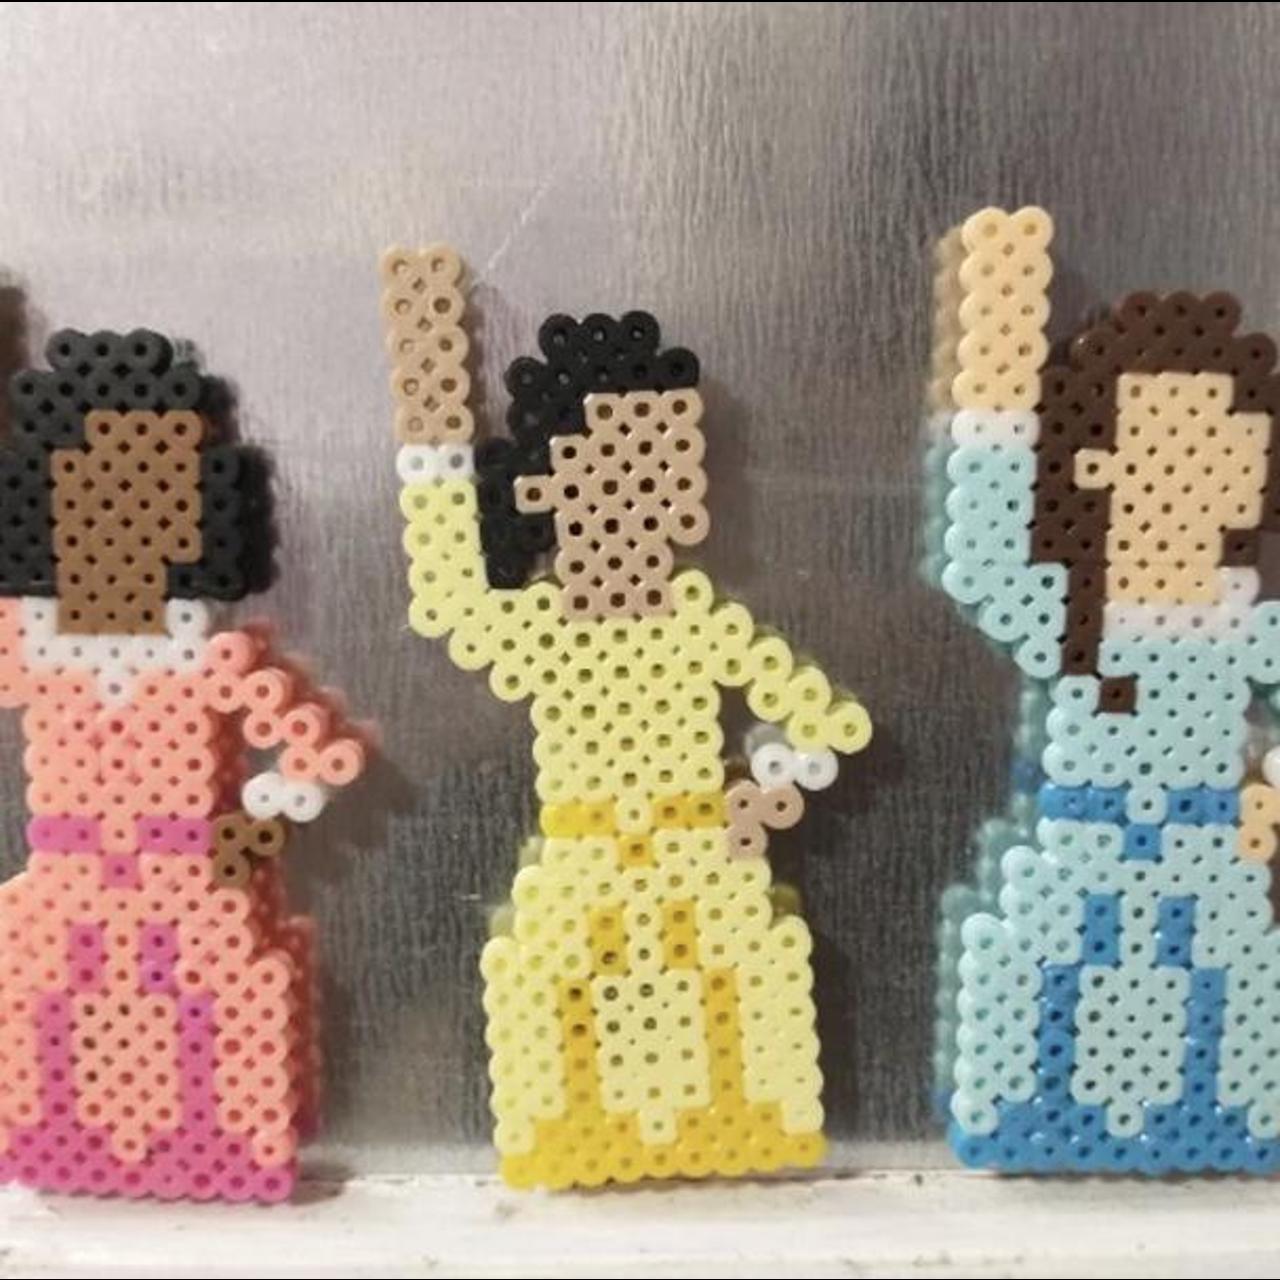 Product Image 1 - perler hamilton schuyler sisters magnets

this